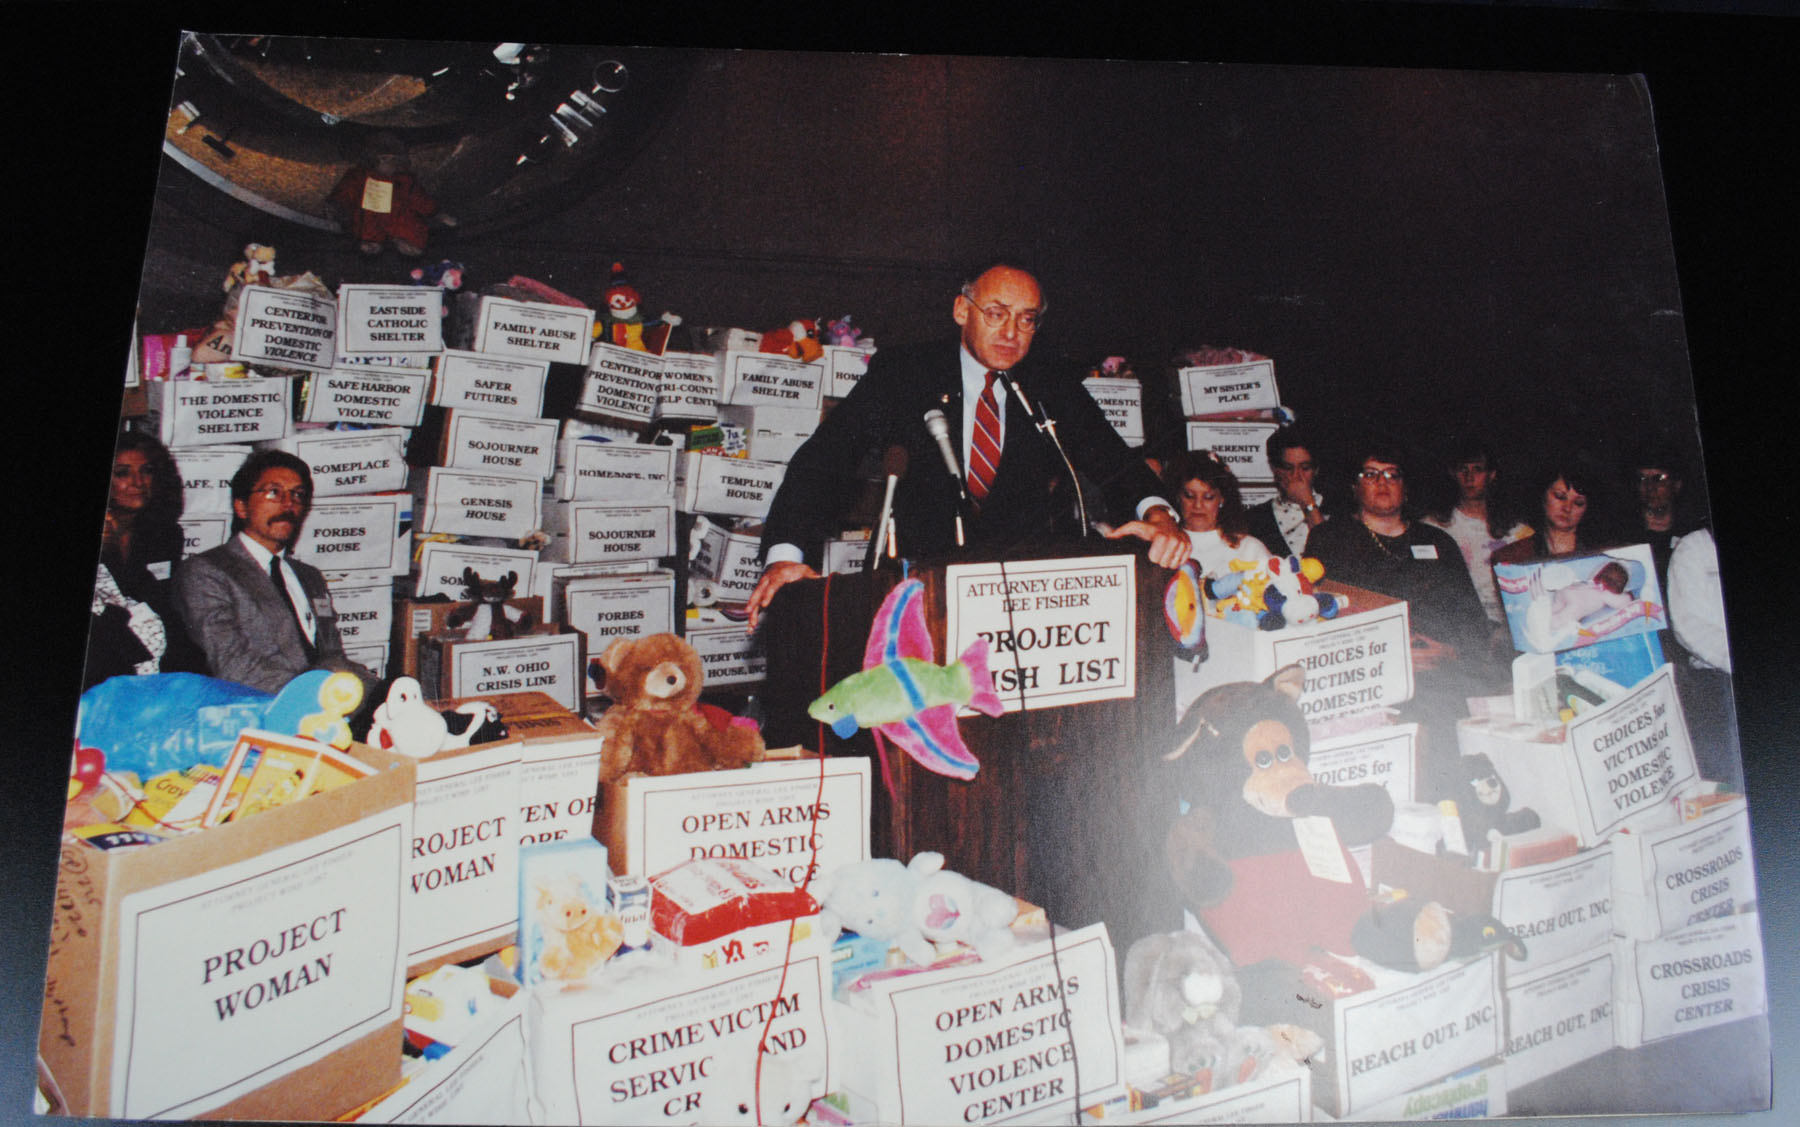 Photograph of Attorney General Lee Fisher Speaking at Project Wish List  